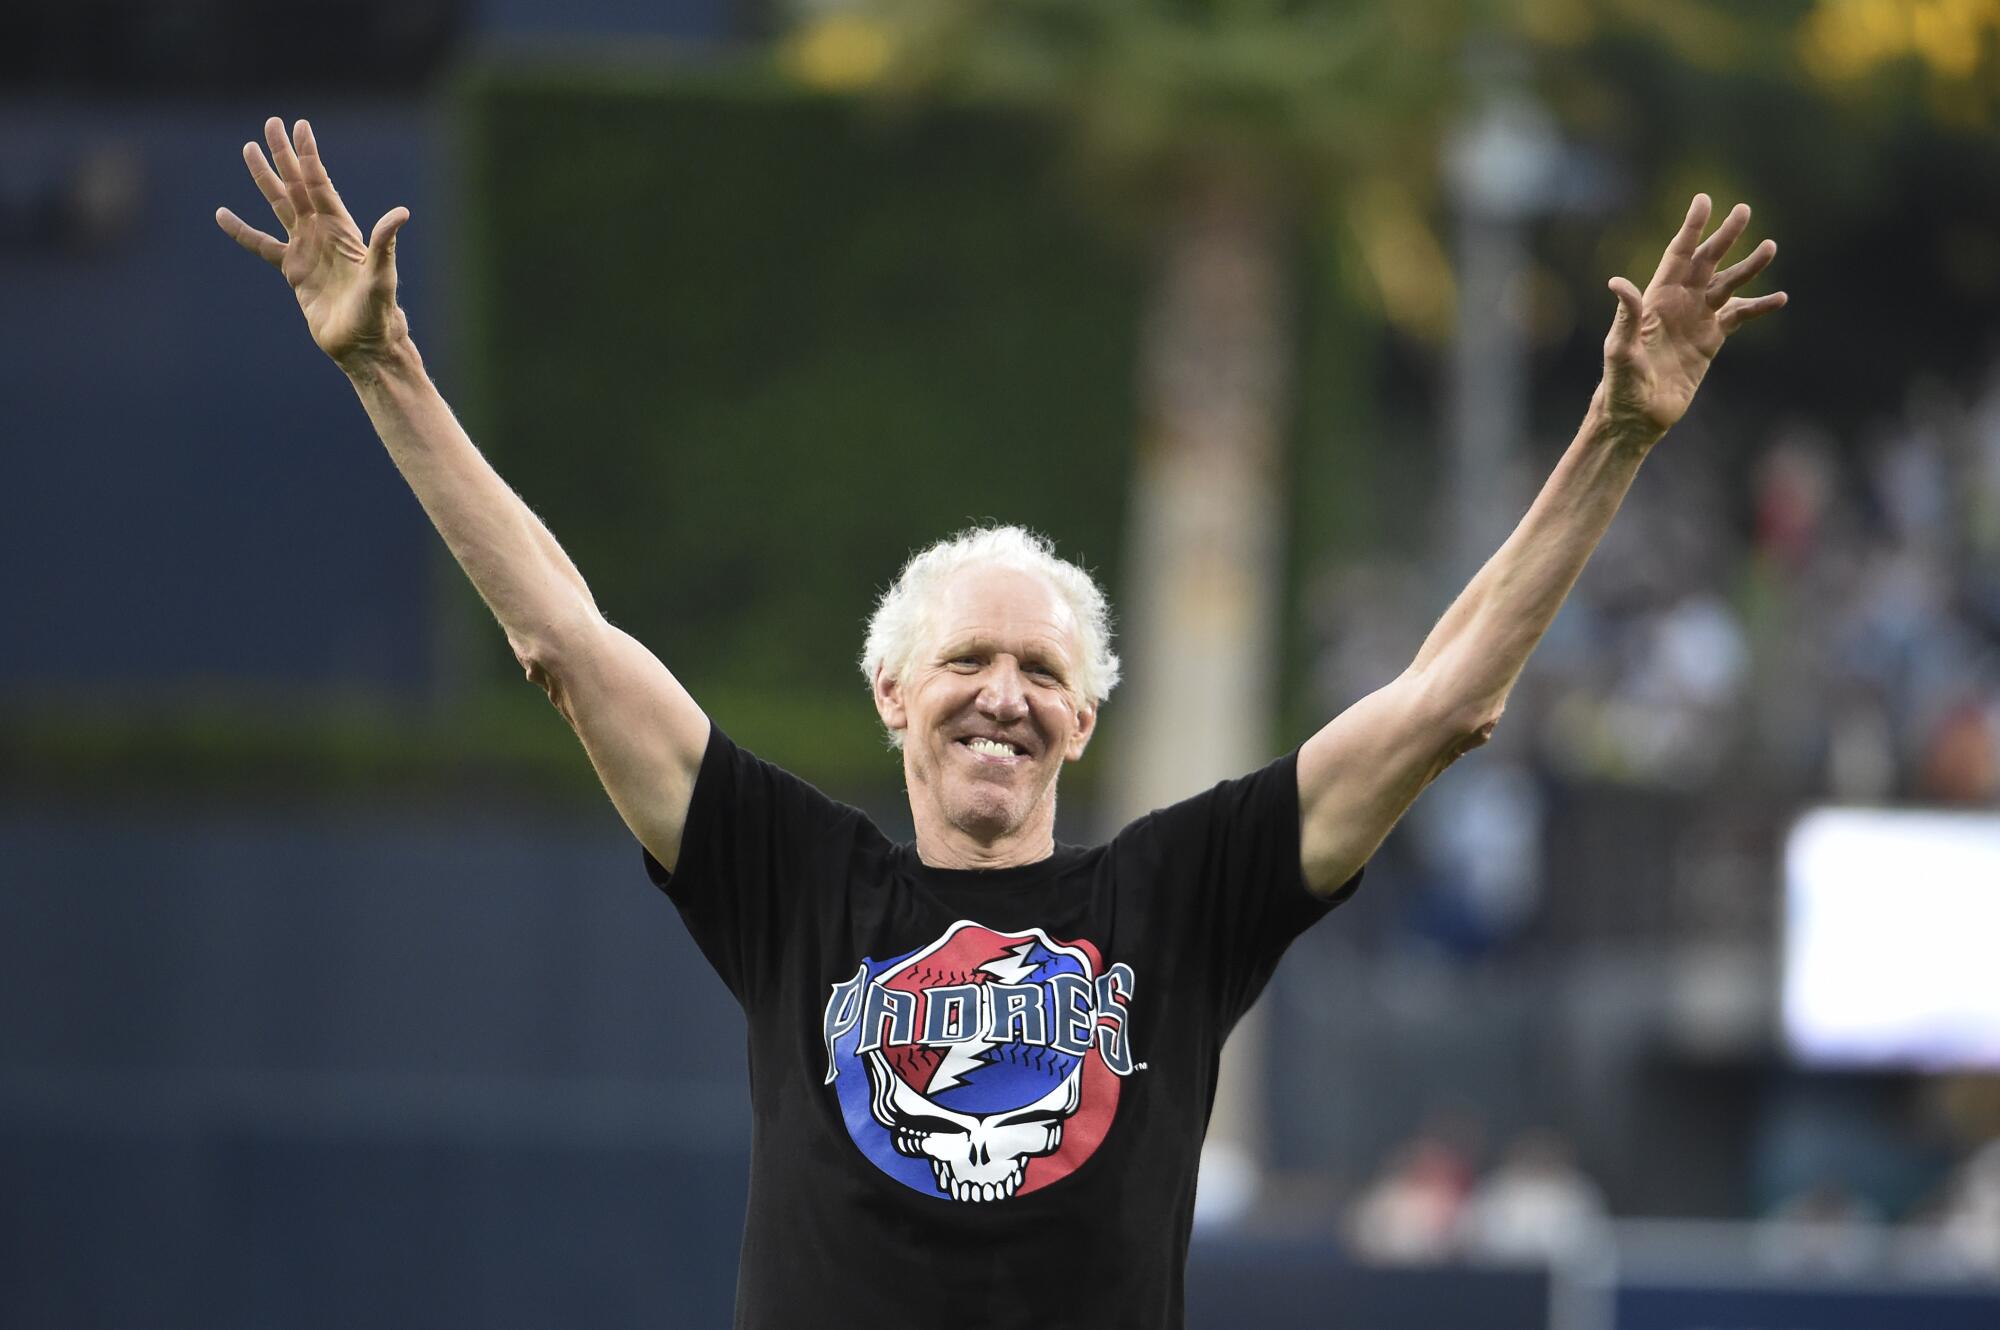 Bill Walton acknowledges the crowd after throwing a ceremonial first pitch at Petco Park.